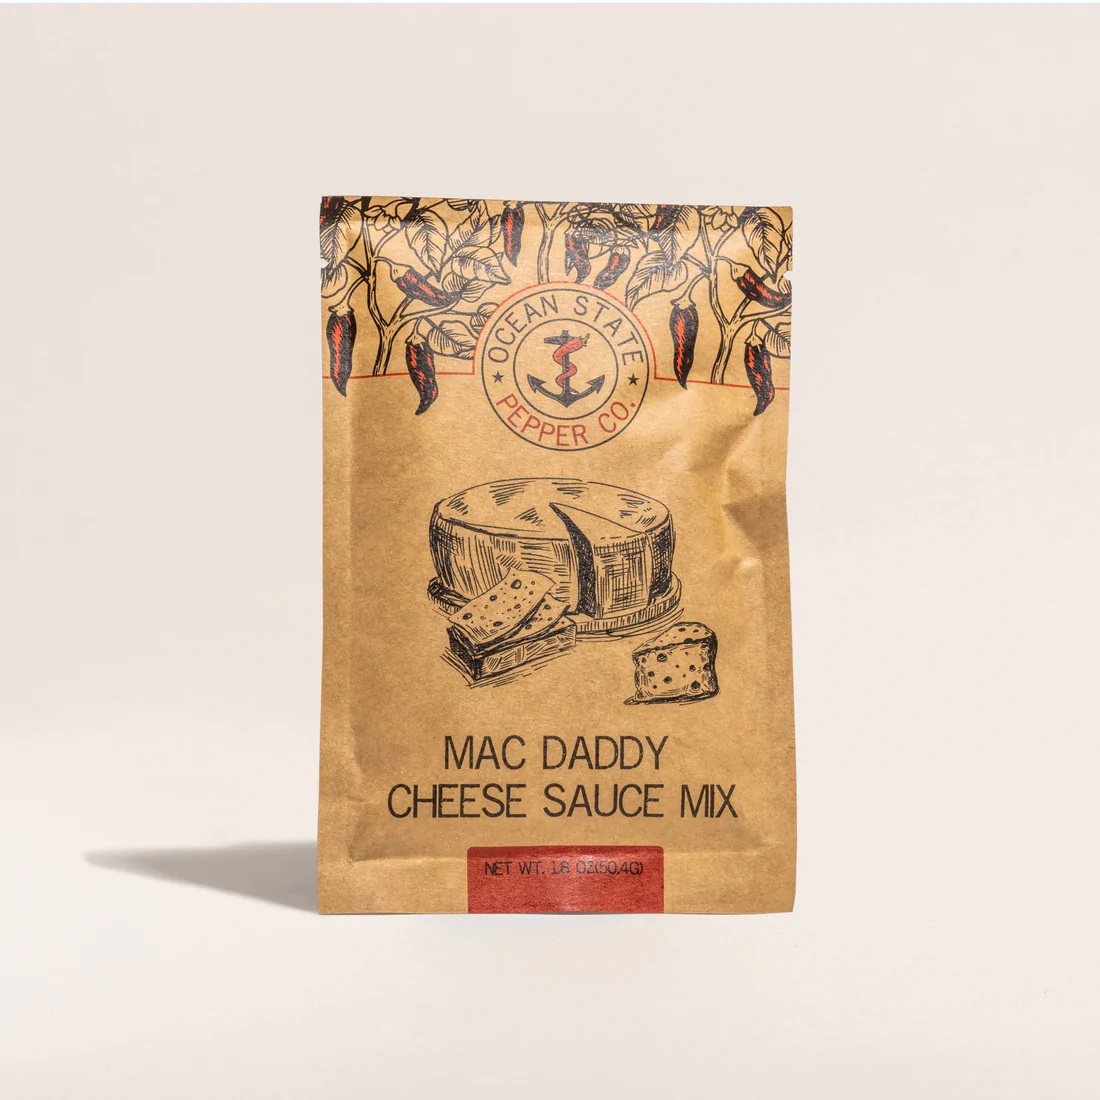 OS Mac Daddy Spiced Cheese Sauce Mix